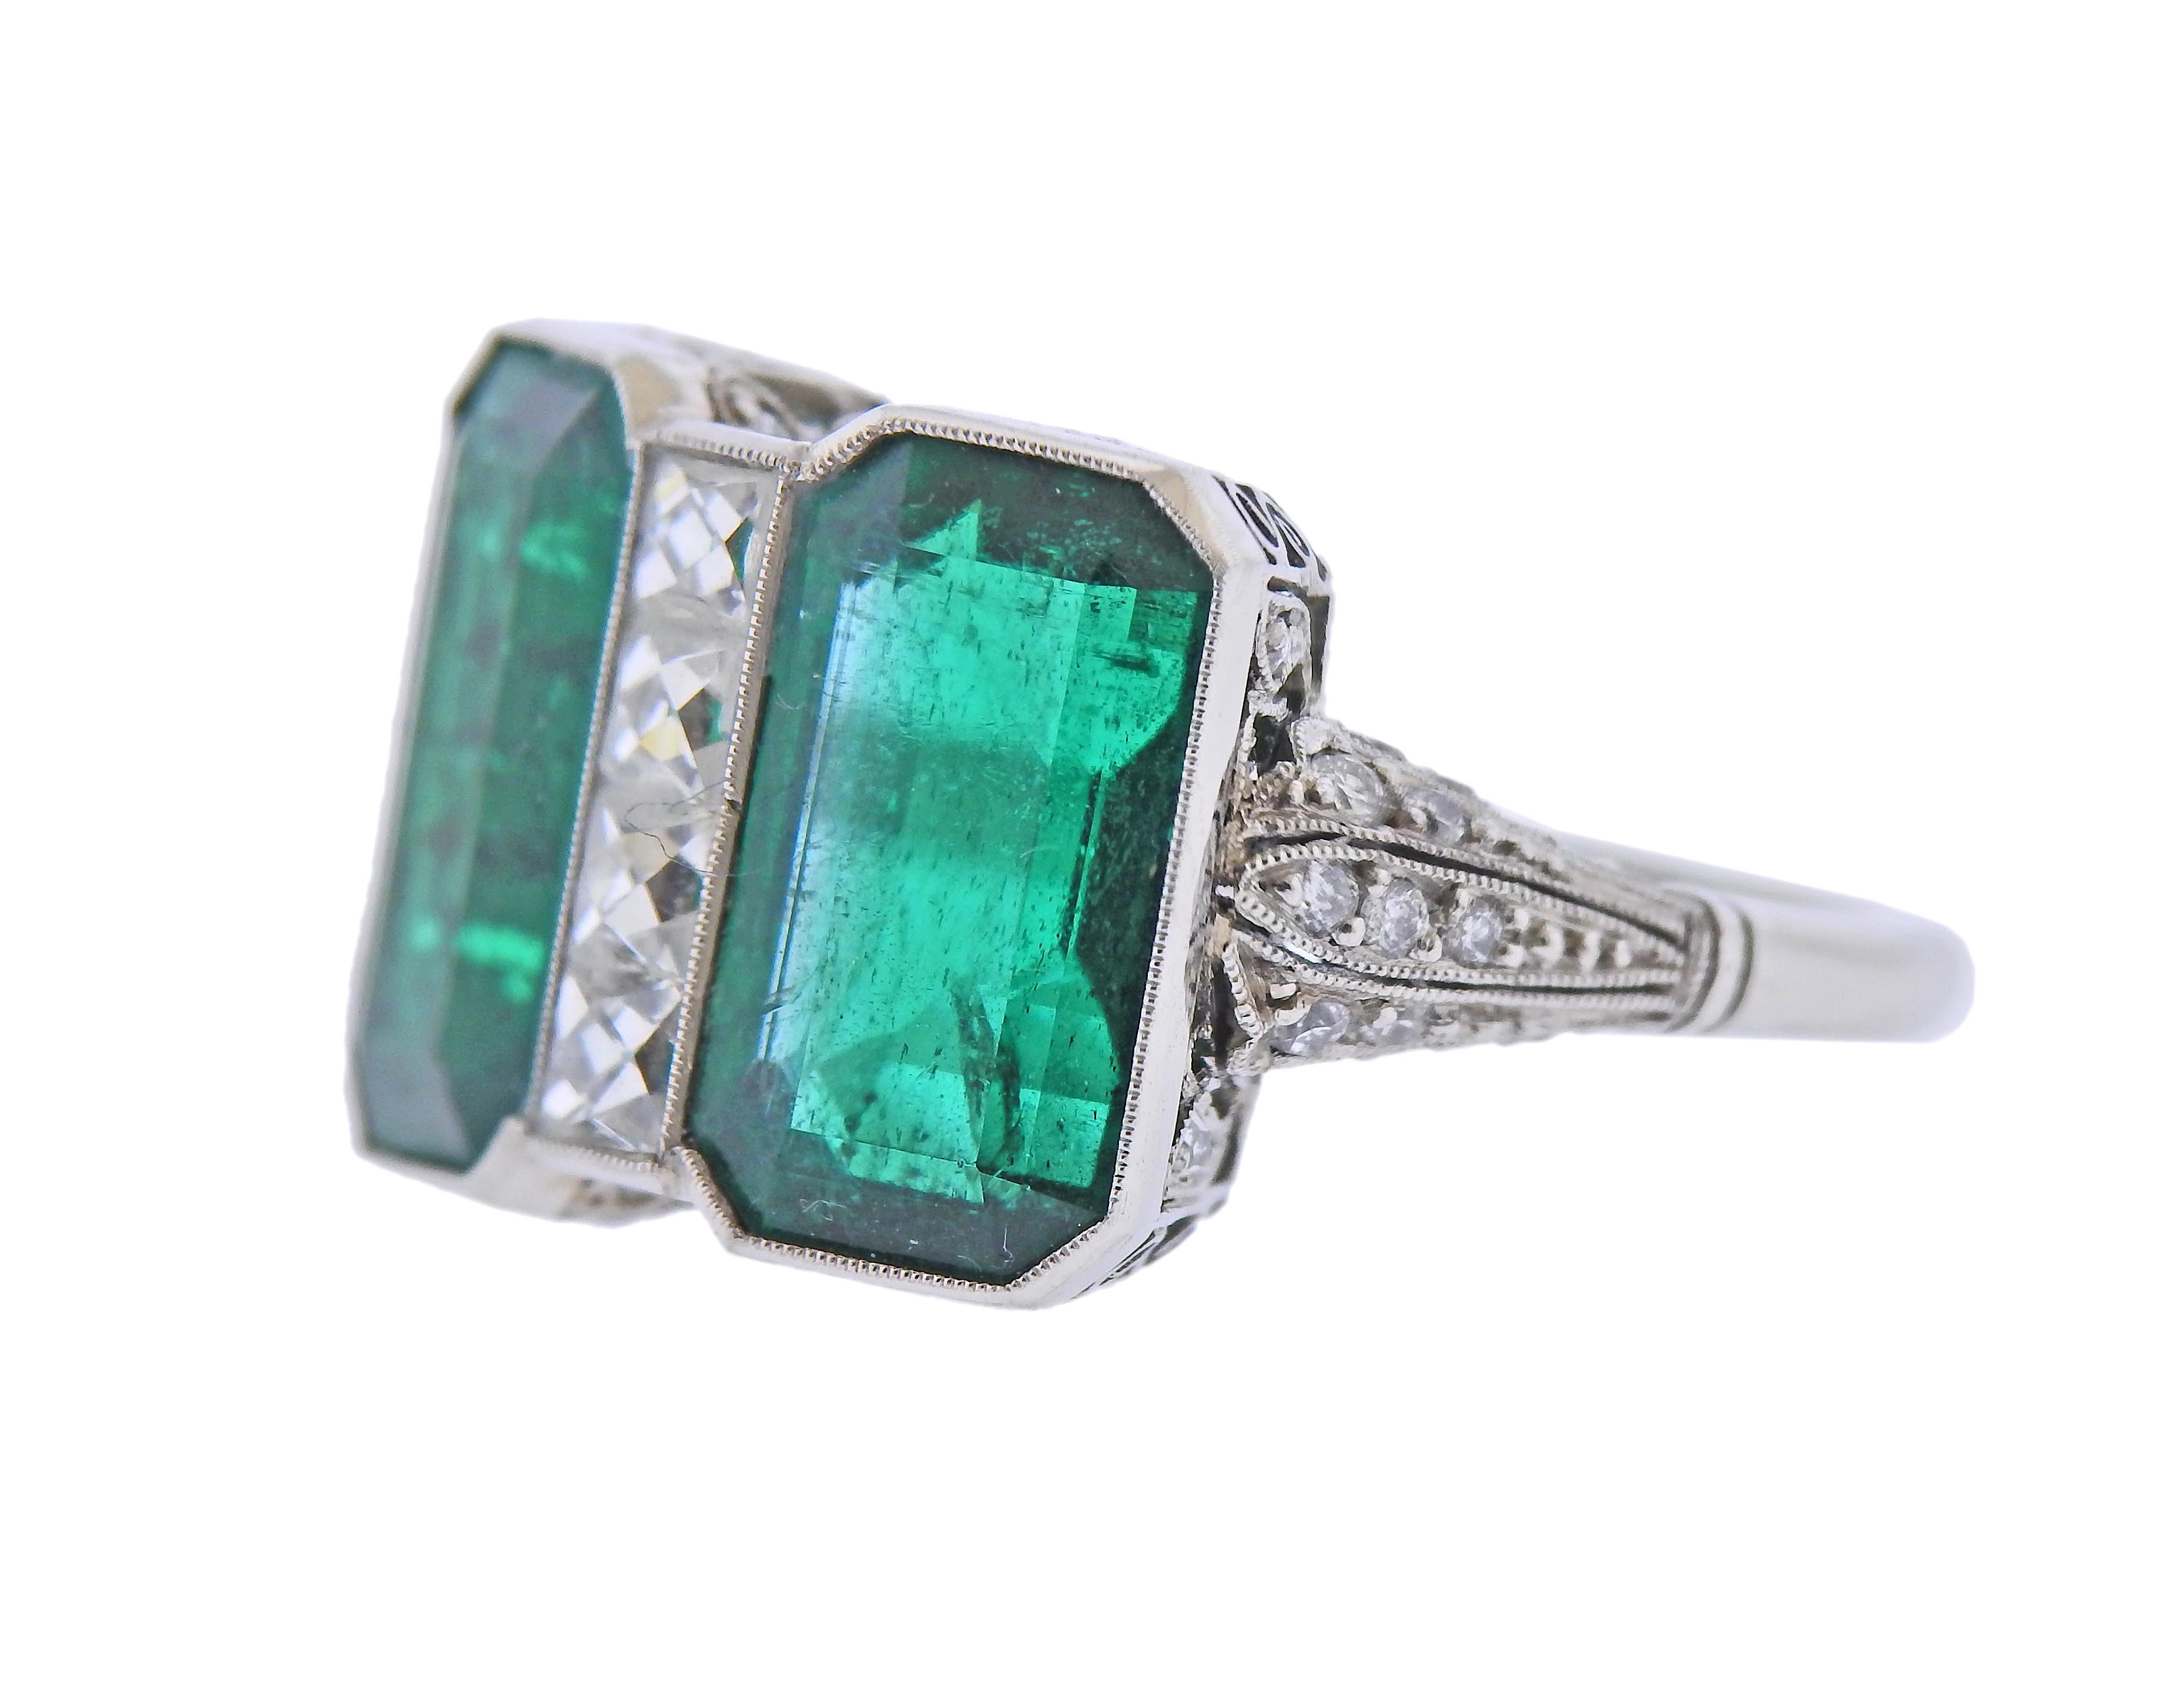 Art Deco platinum ring, featuring two rectangular emeralds, totaling 9.55cts, and approx. 0.73cts in diamonds. Ring size - 6.25, ring top is 14mm x 18mm. Weight of the piece - 8.2 grams.